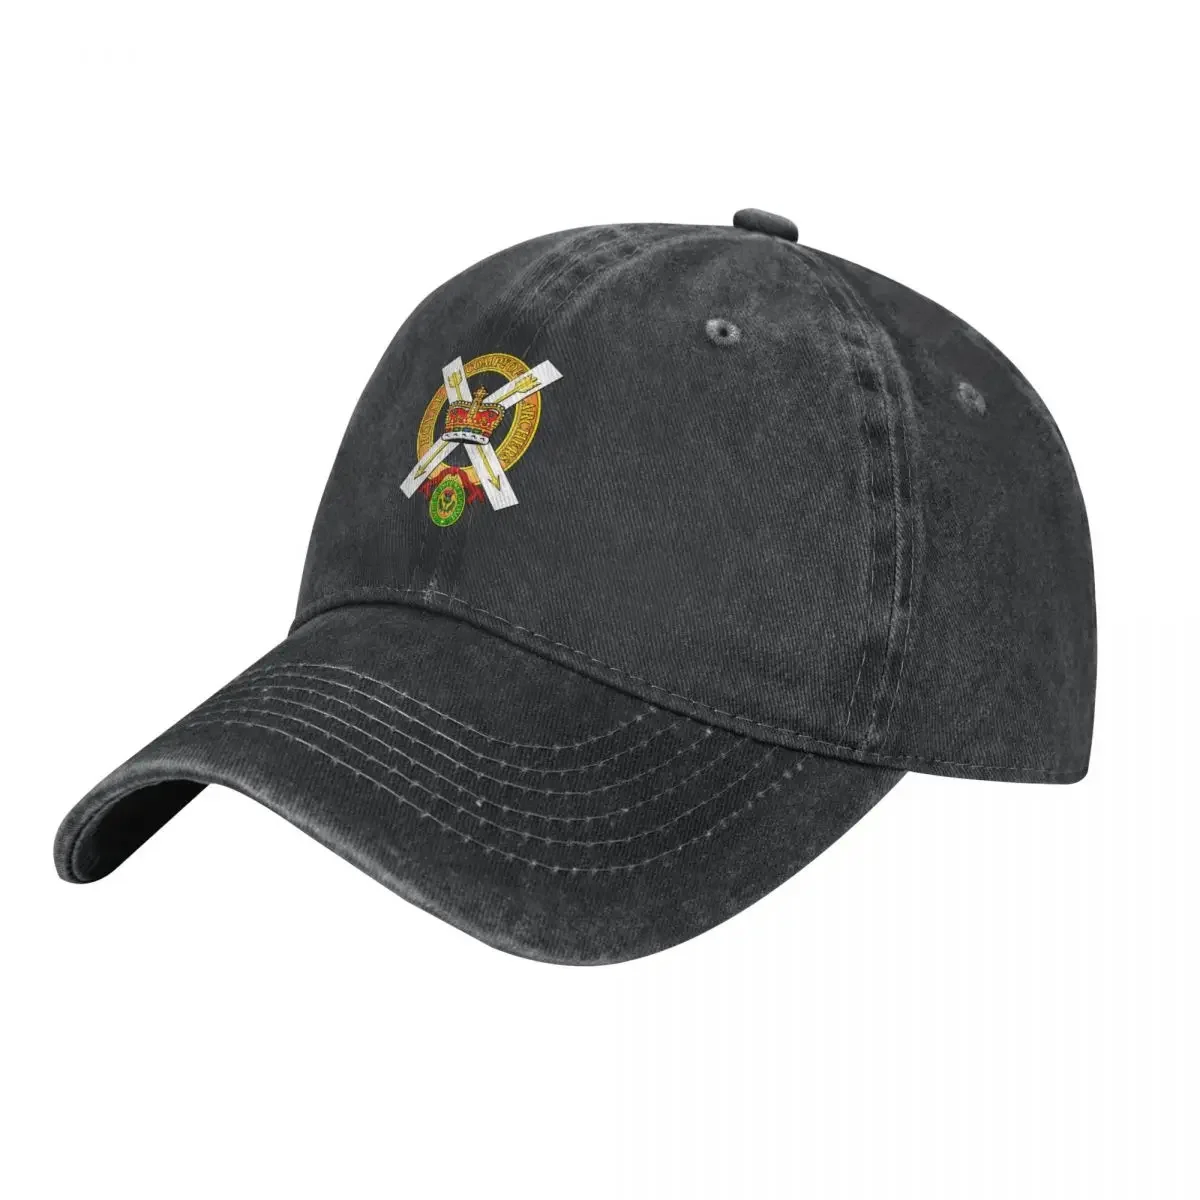 

THE ROYAL COMPANY OF ARCHERS Cowboy Hat Snapback Cap New In Hat Thermal Visor Trucker Hats For Men Women's